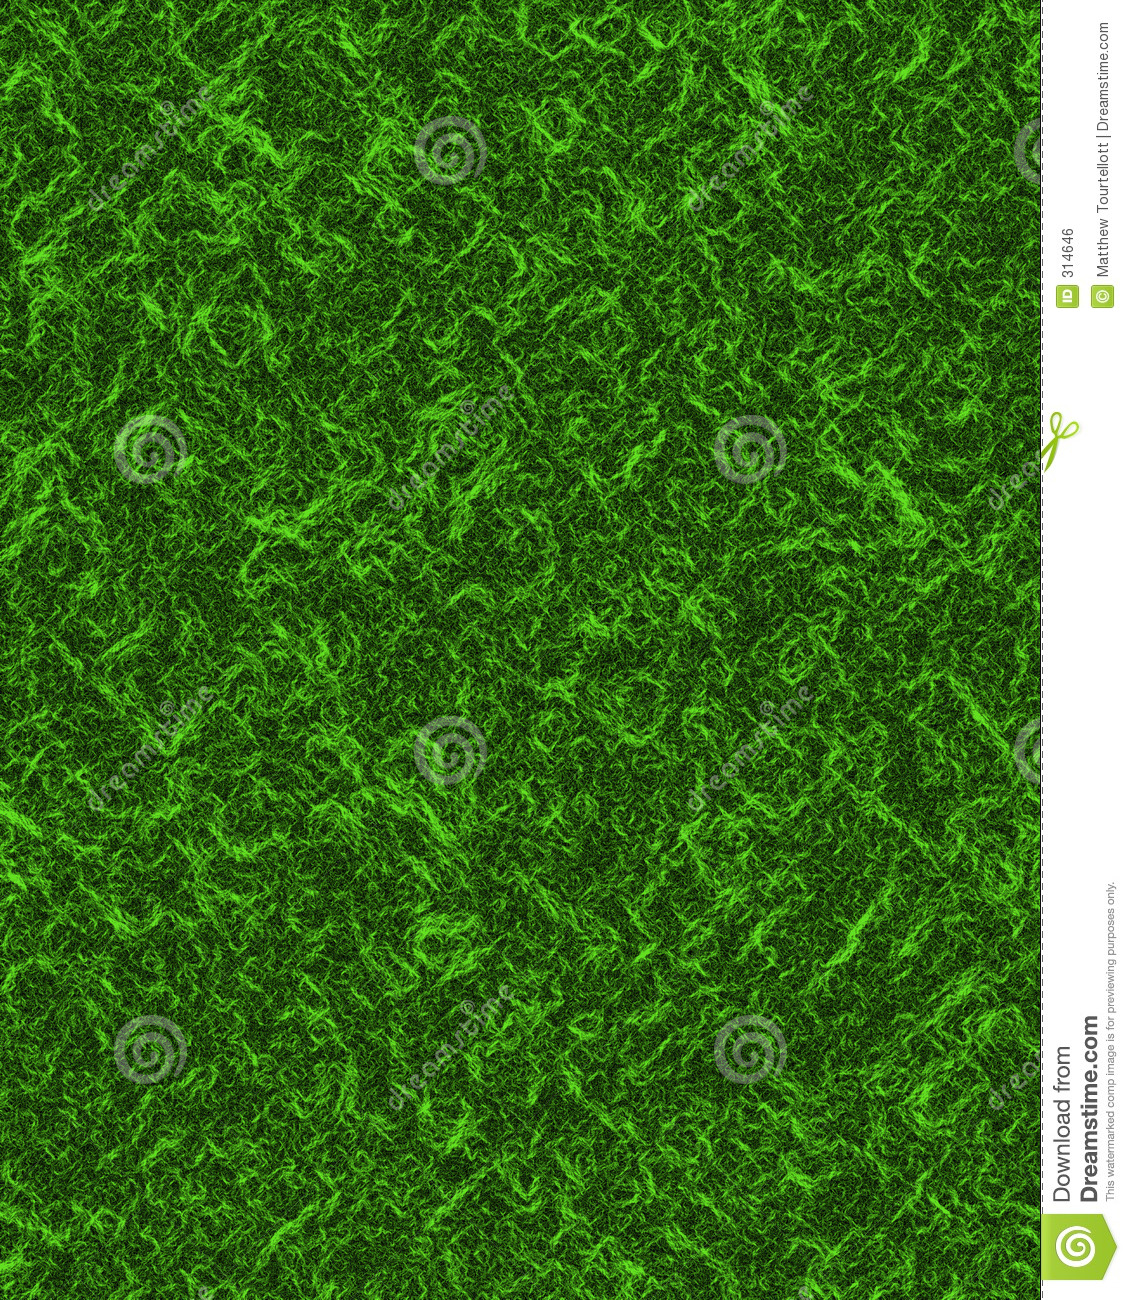 Mowed Grass Background Texture Royalty Free Stock Image.